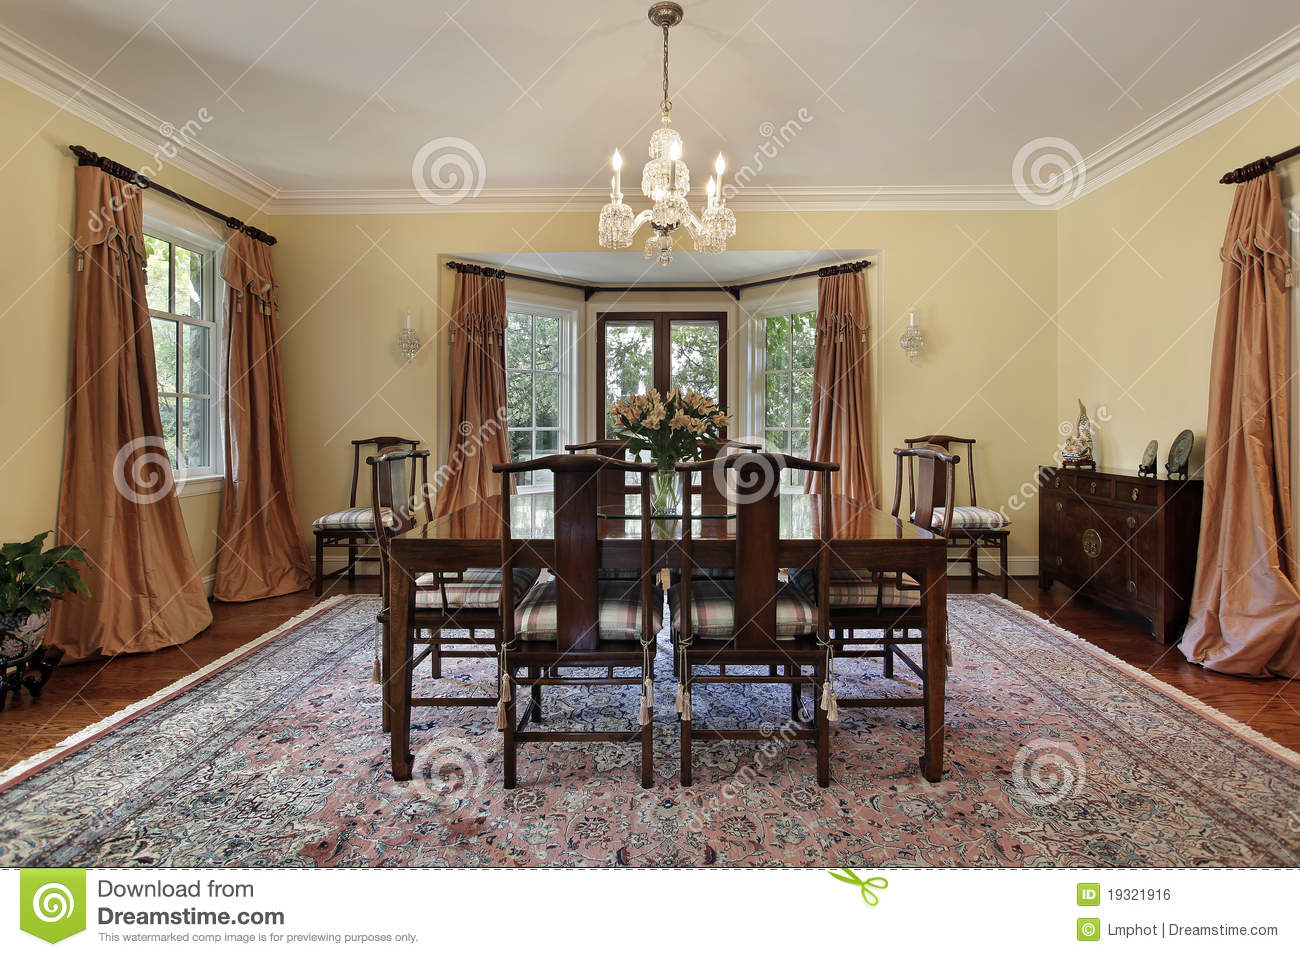 Dining Room With Doors To Patio Royalty Free Stock Image   Image    